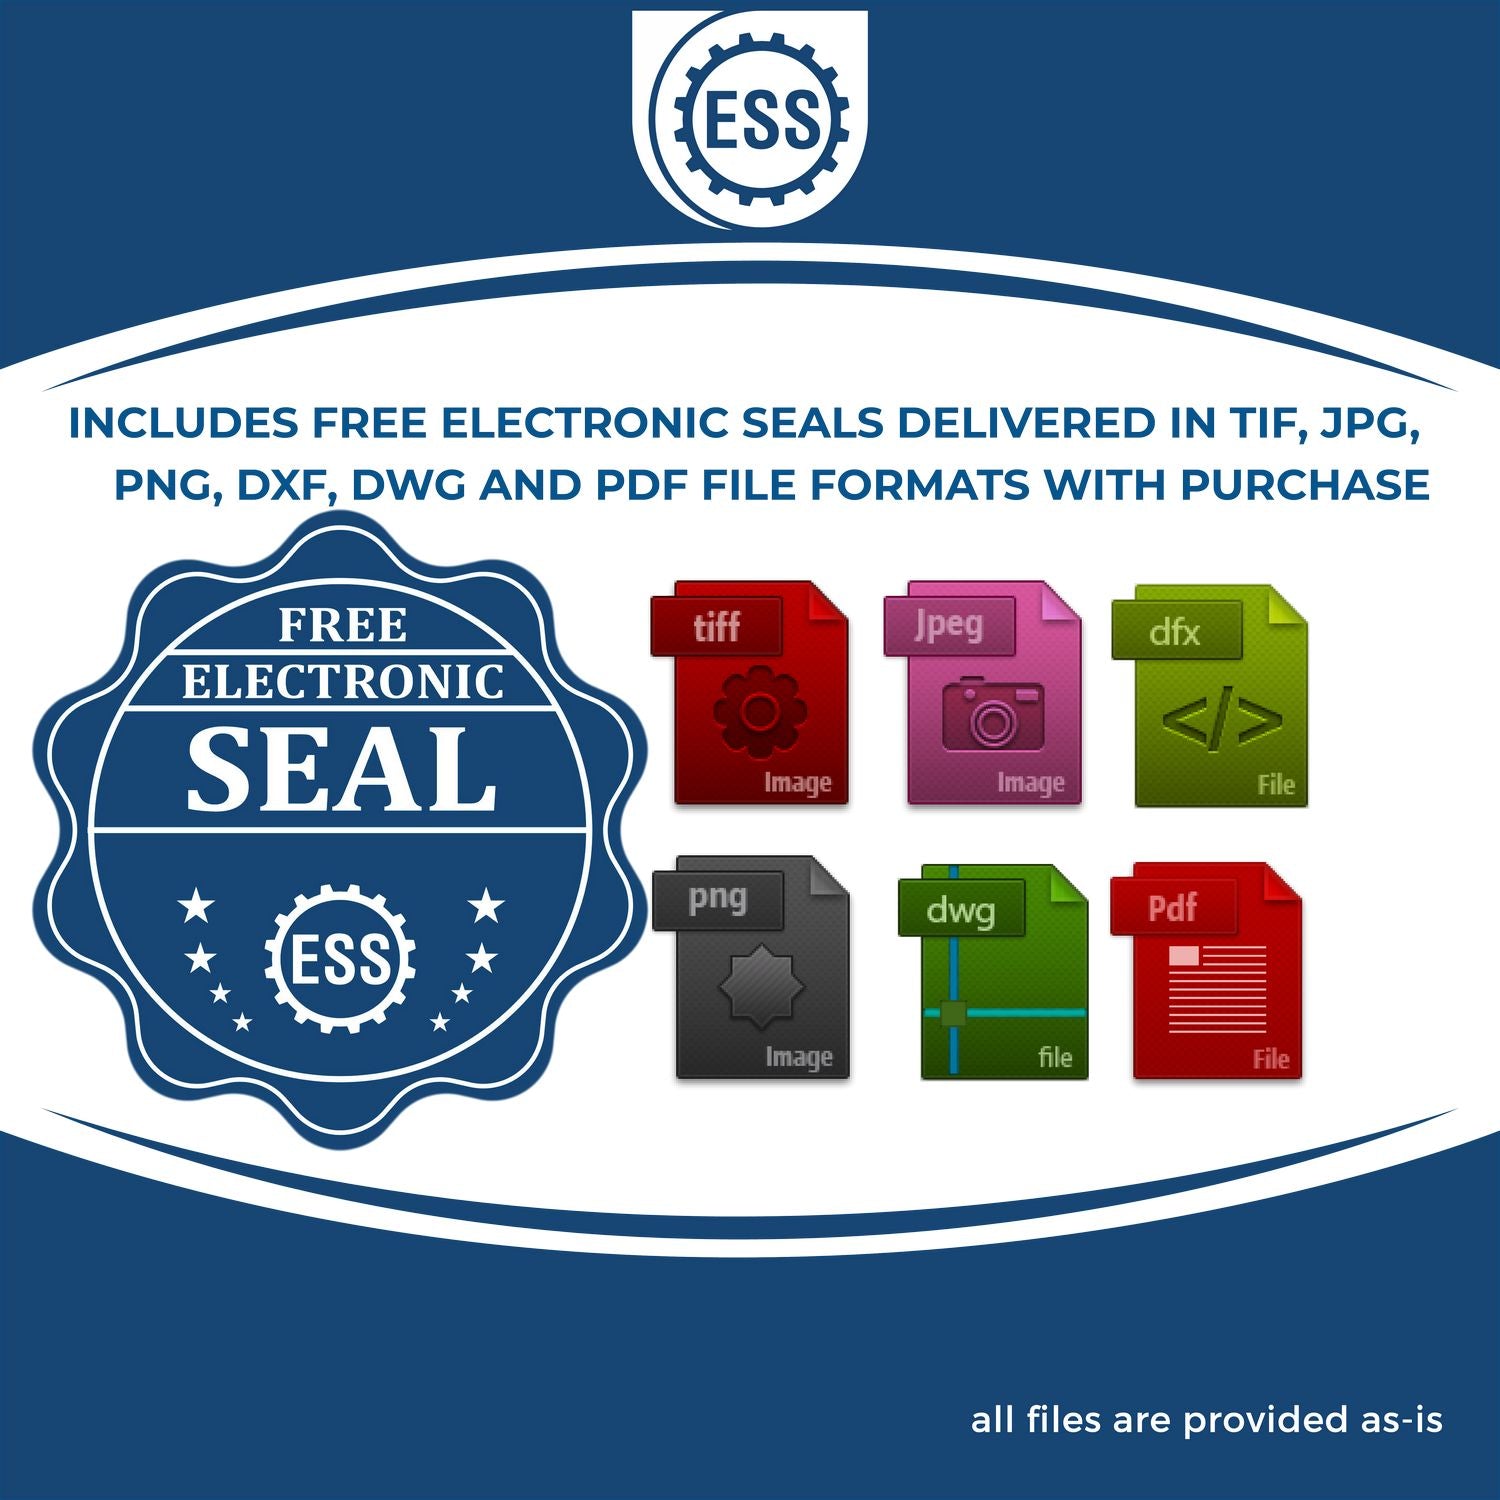 An infographic for the free electronic seal for the Self-Inking Indiana Landscape Architect Stamp illustrating the different file type icons such as DXF, DWG, TIF, JPG and PNG.